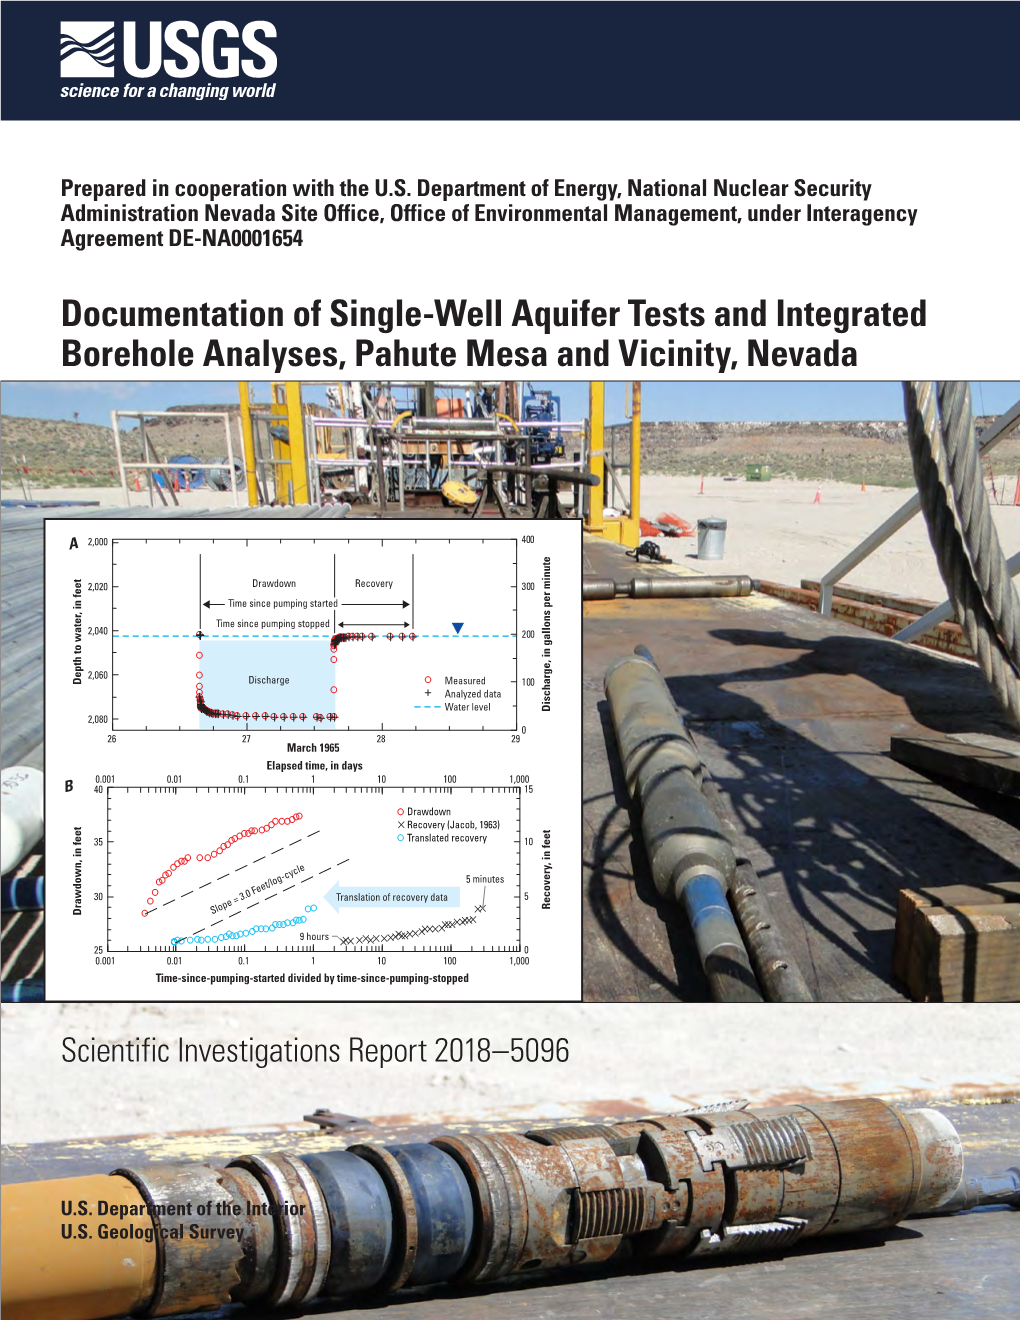 Documentation of Single-Well Aquifer Tests and Integrated Borehole Analyses, Pahute Mesa and Vicinity, Nevada